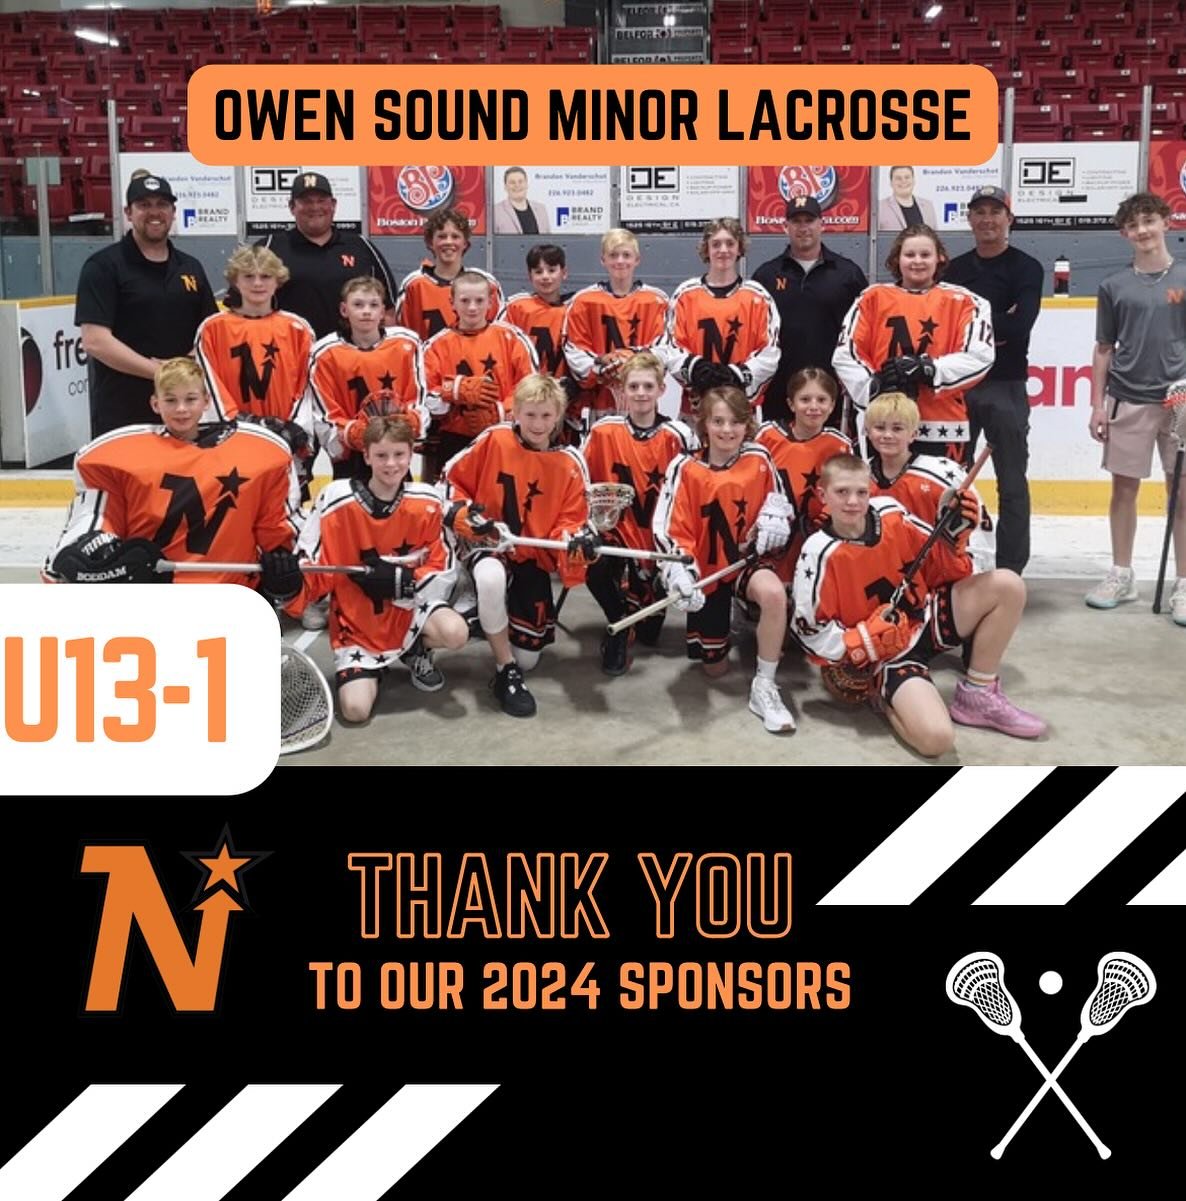 Thank you to our sponsors from U13-1! 🥍